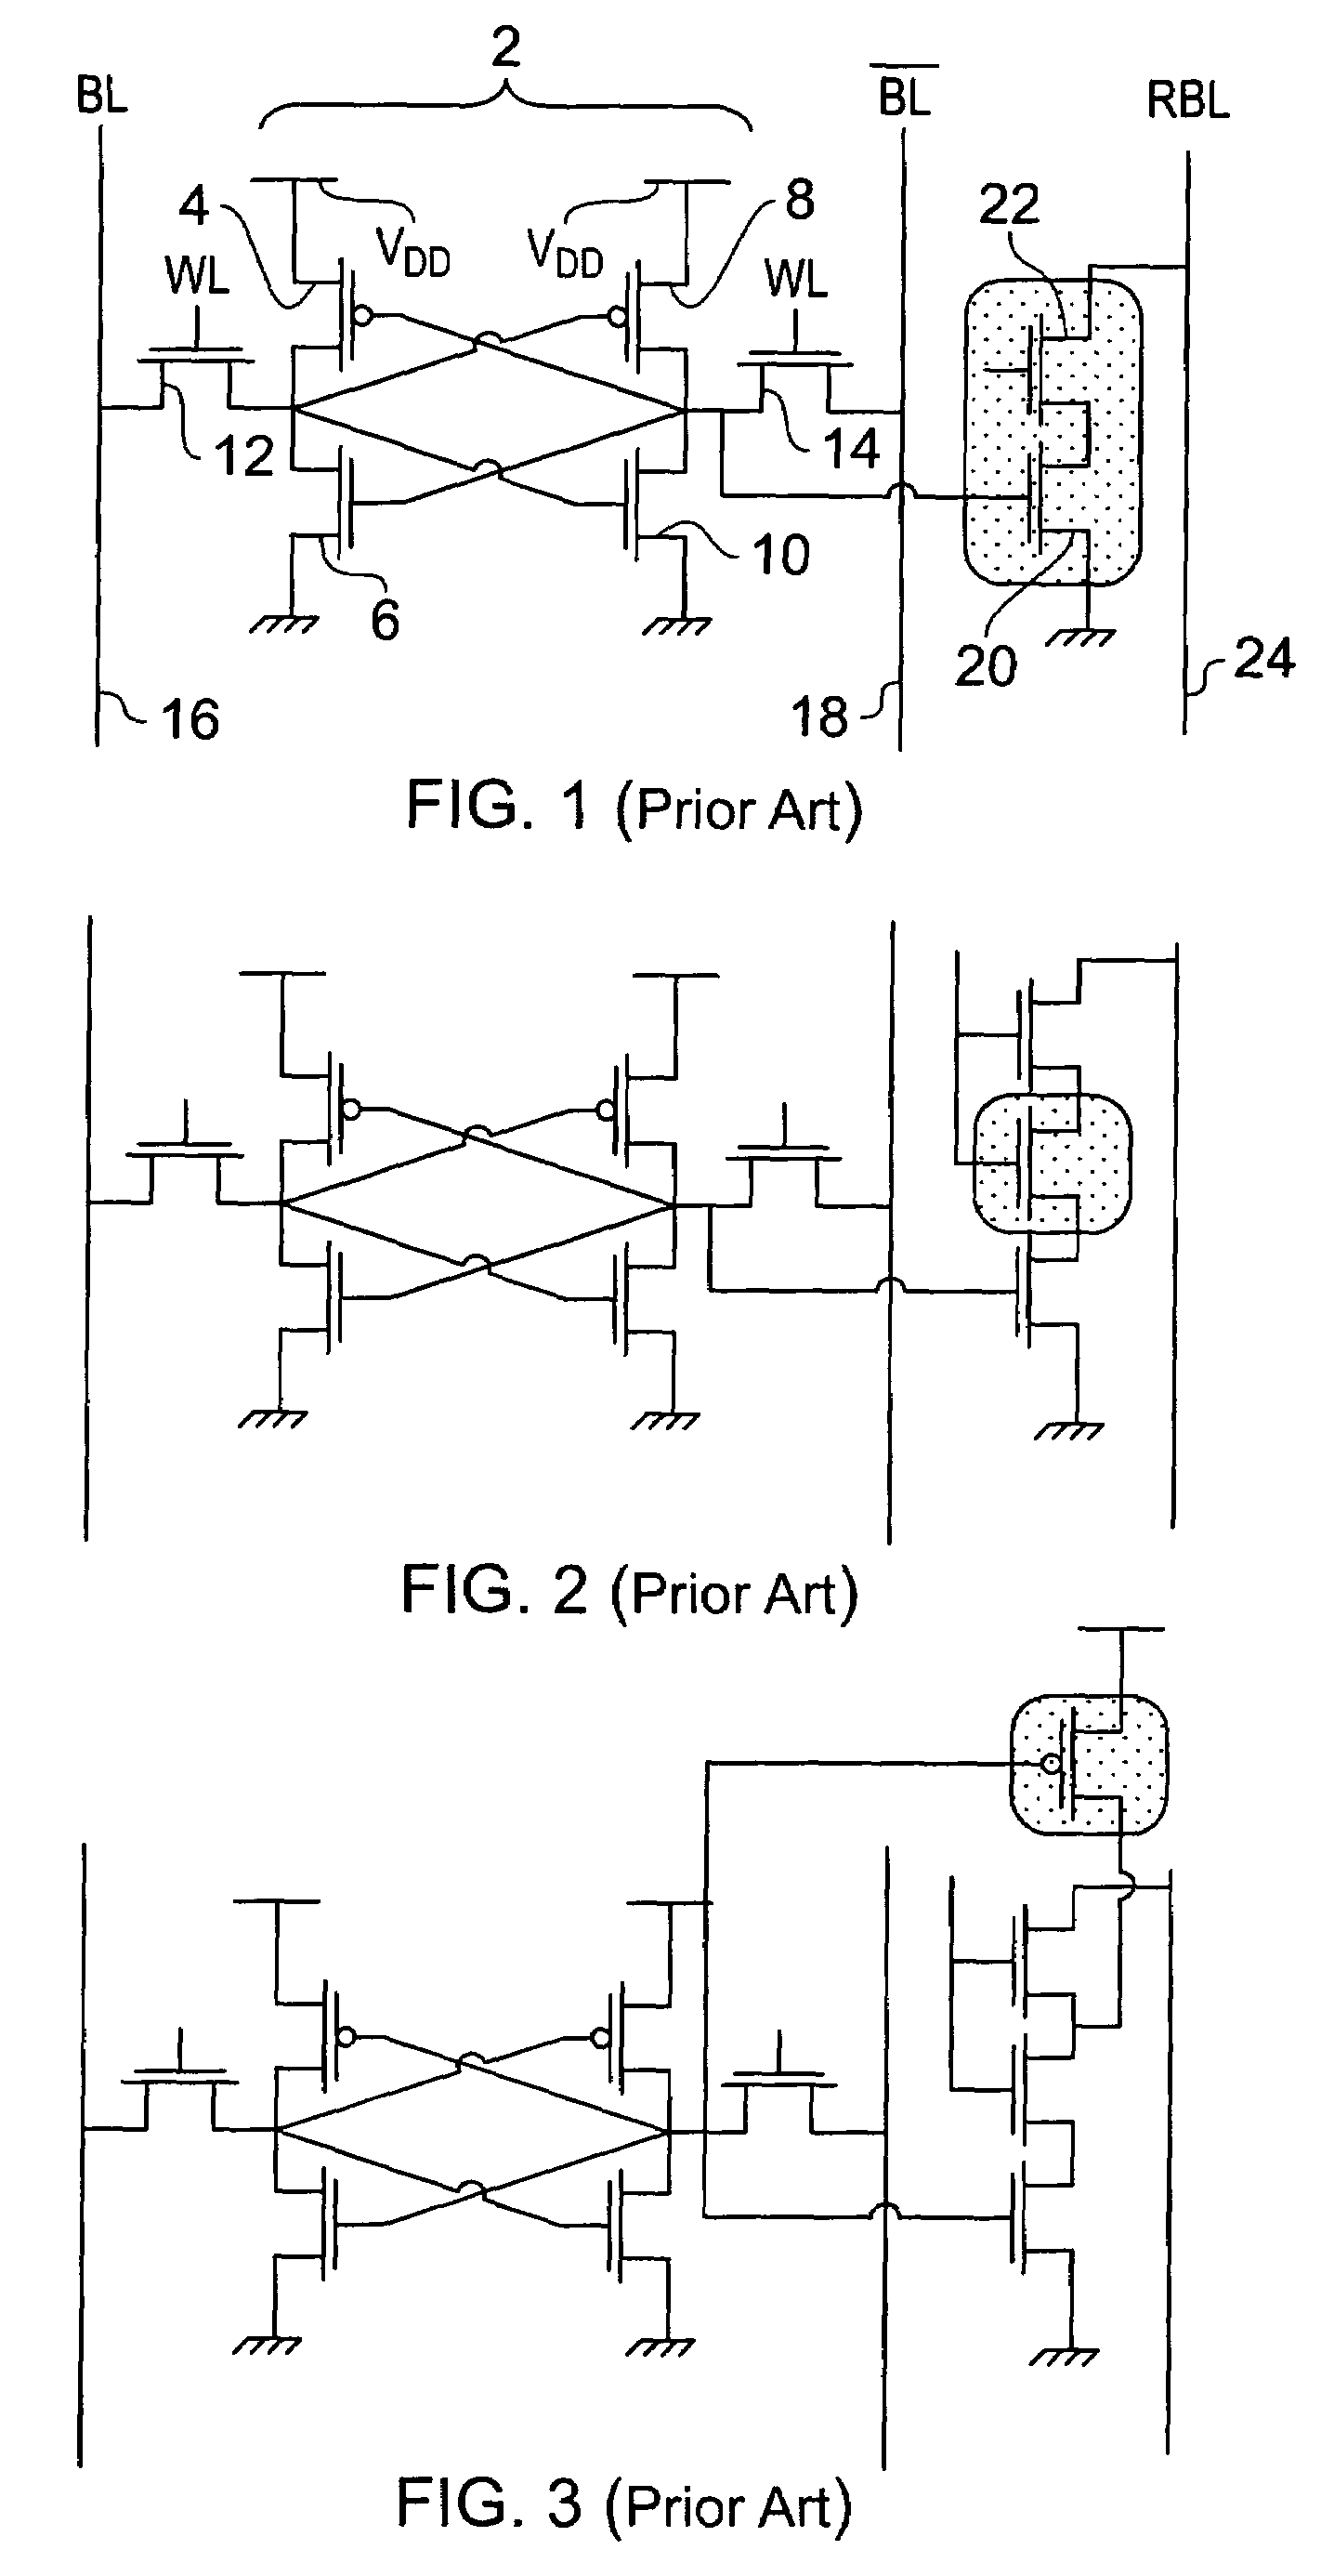 Integrated circuit memory access mechanisms